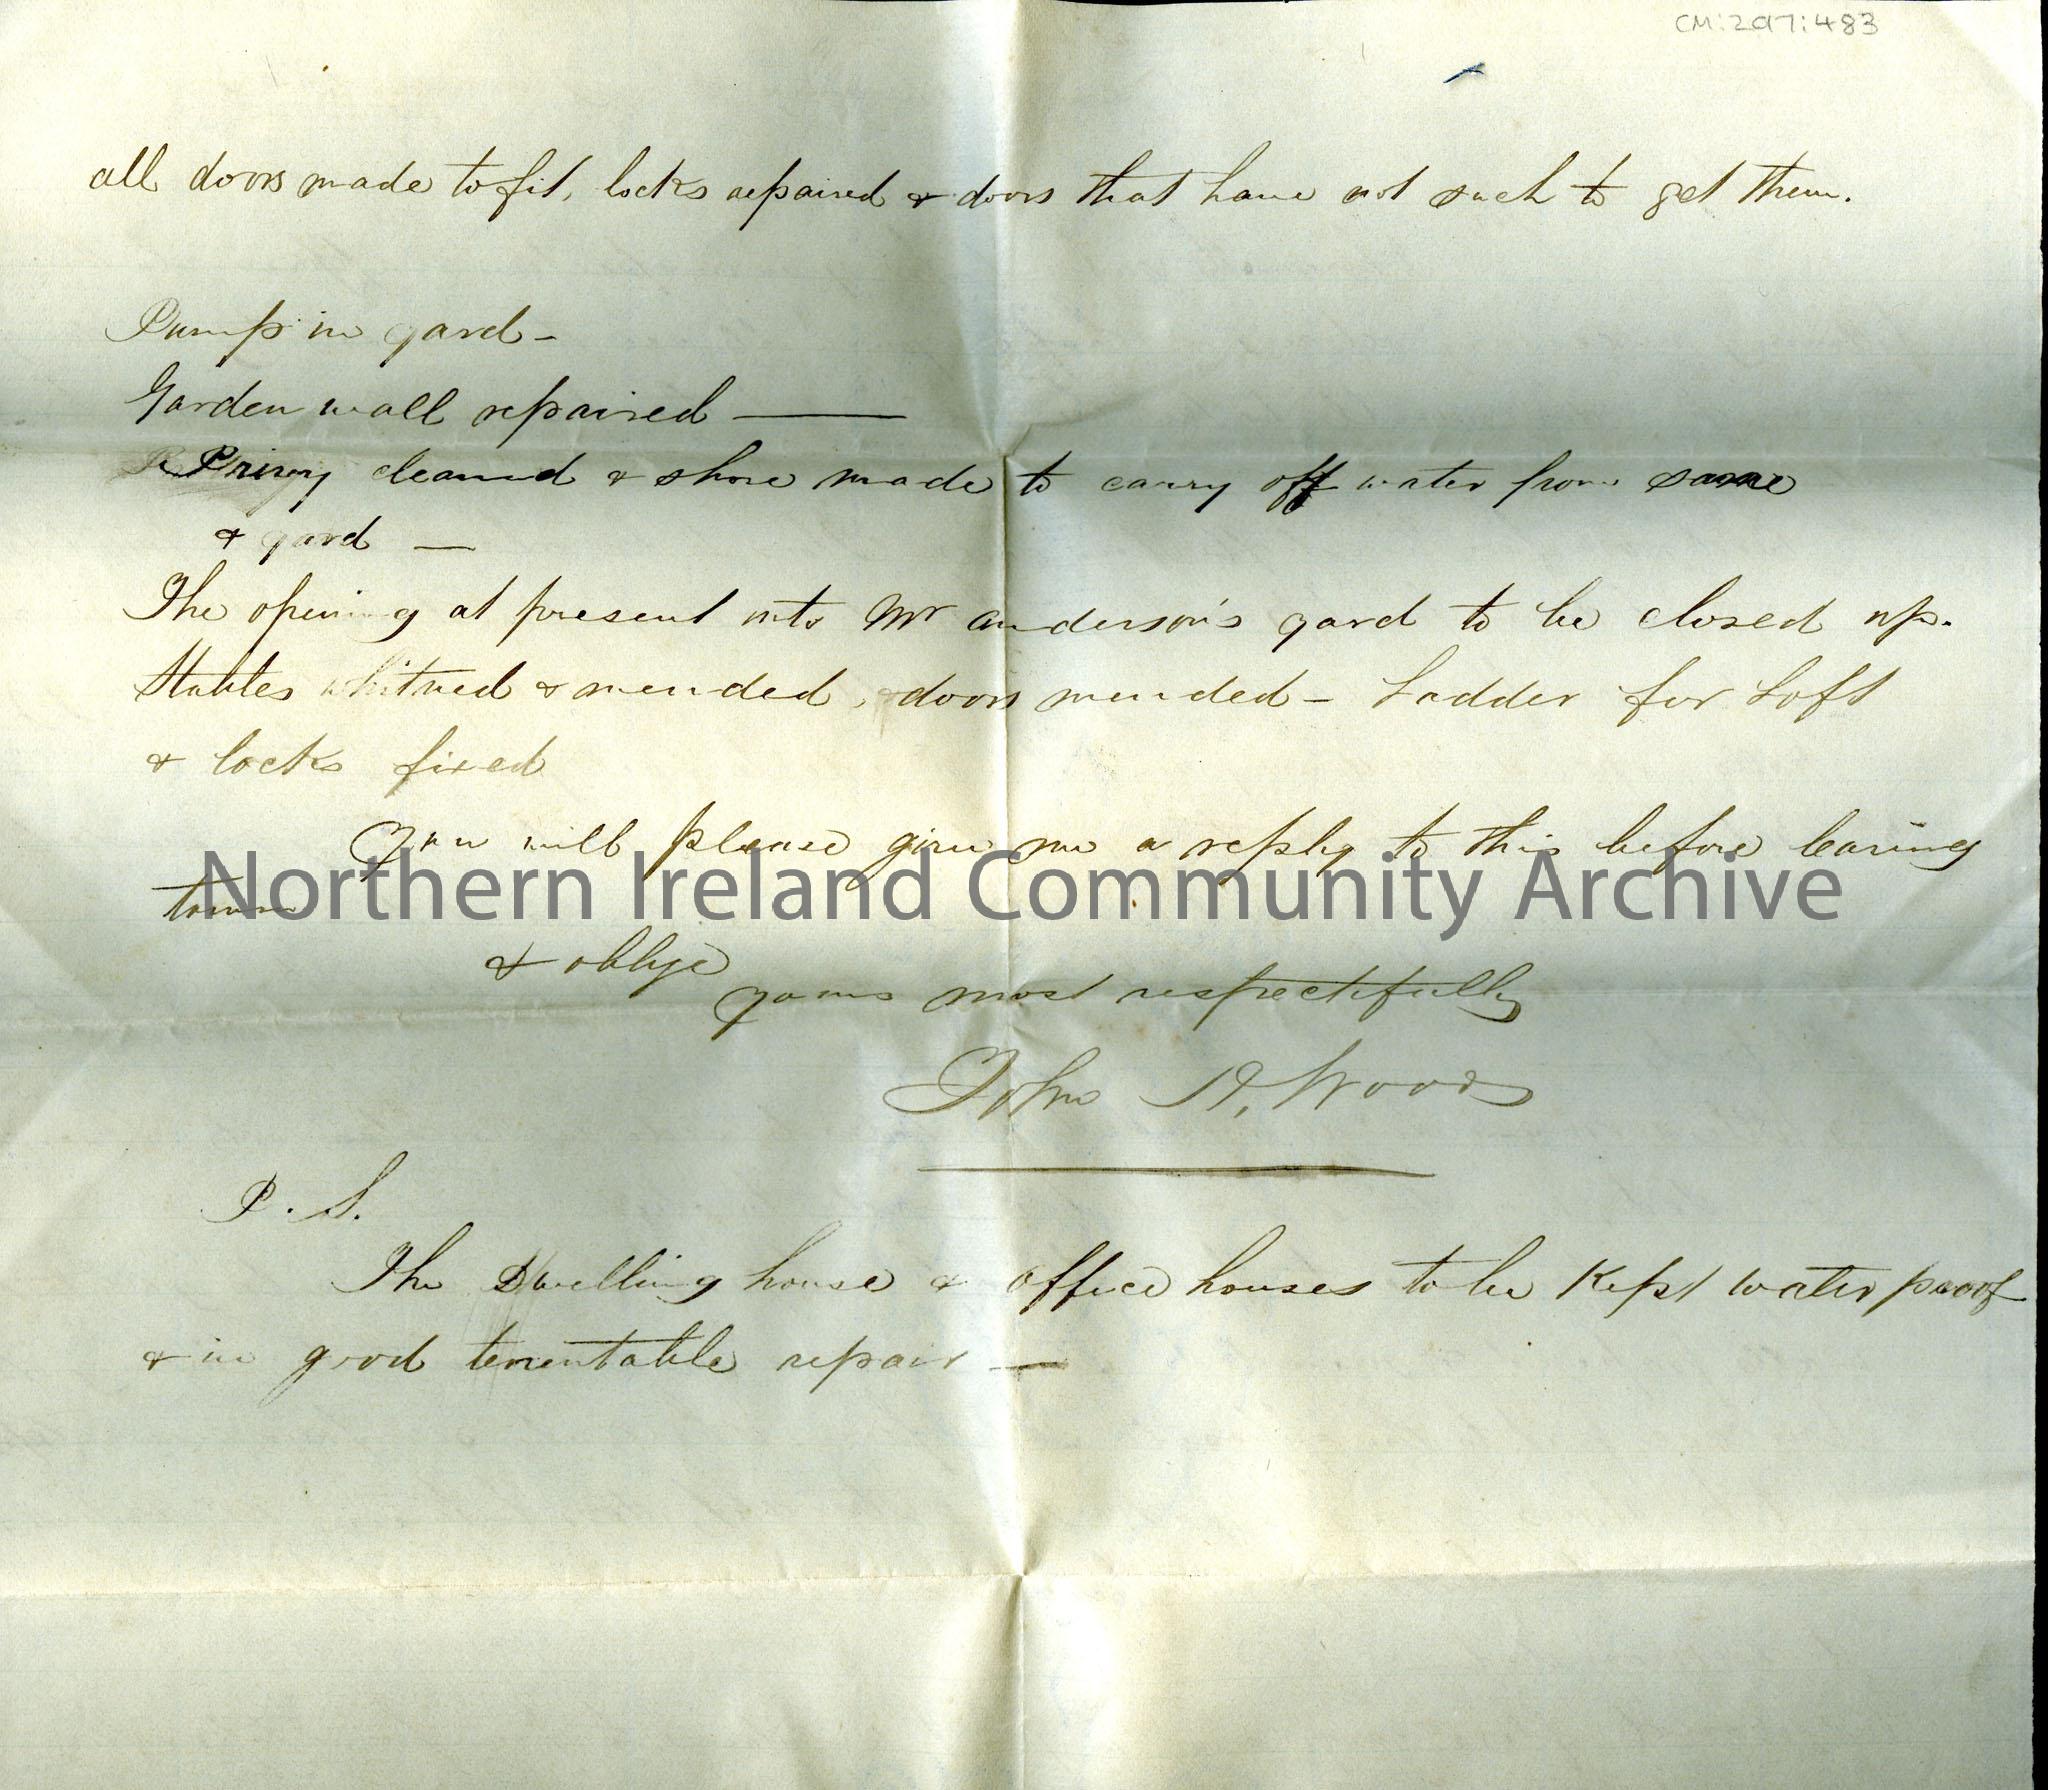 Handwritten letter to ‘Mr. Hezlet’ from ‘John Moore(?)’. Letter is seeking approval from Mr. Hezlet for repairs to a property to be put up for rent. L… – scan475c